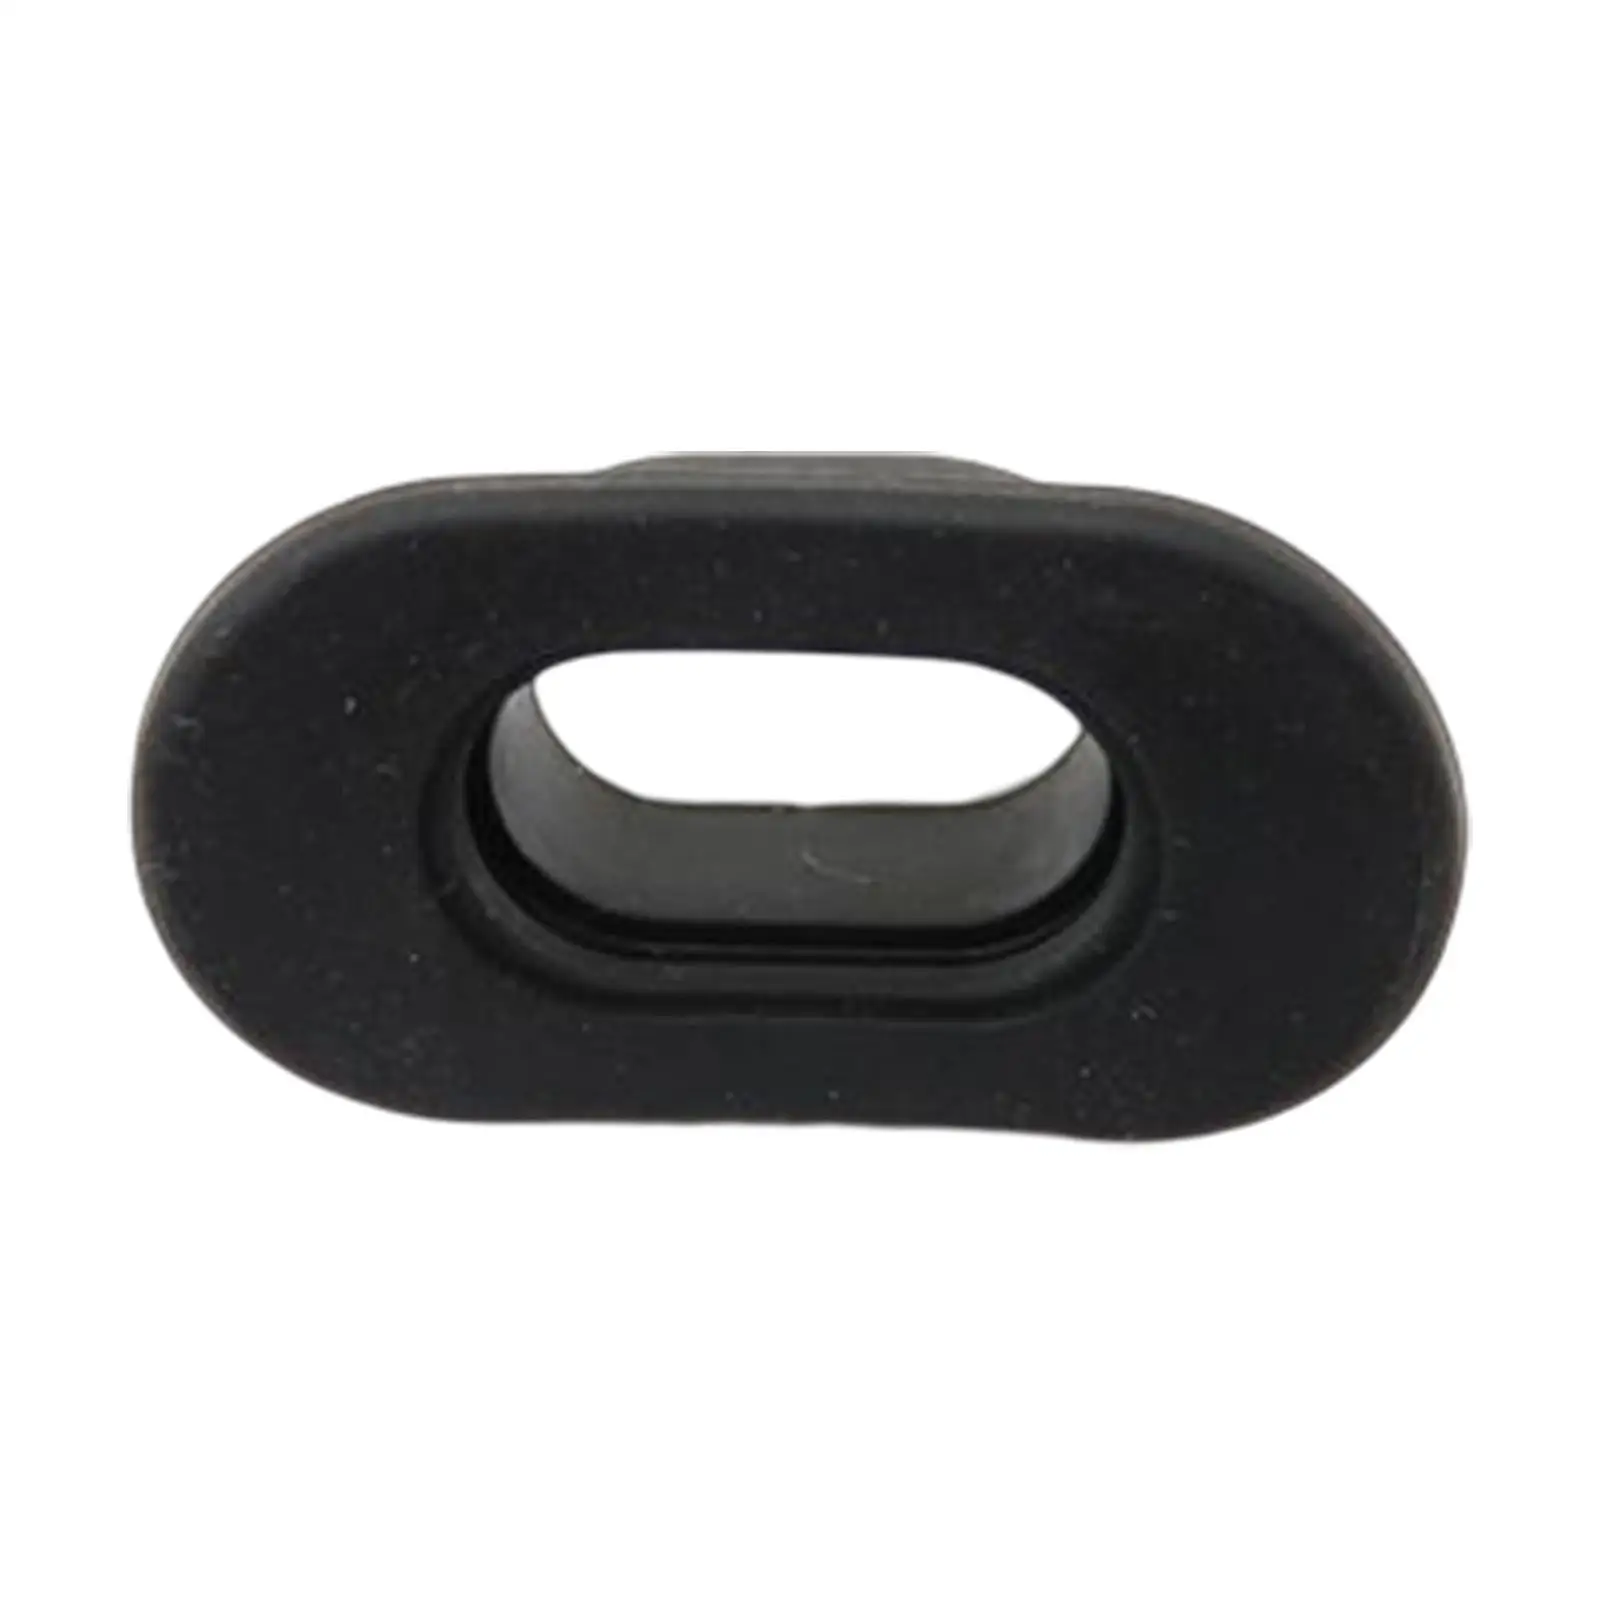 Diving K Inflator Mouthpiece Flexible for Underwater Equipment Accessories